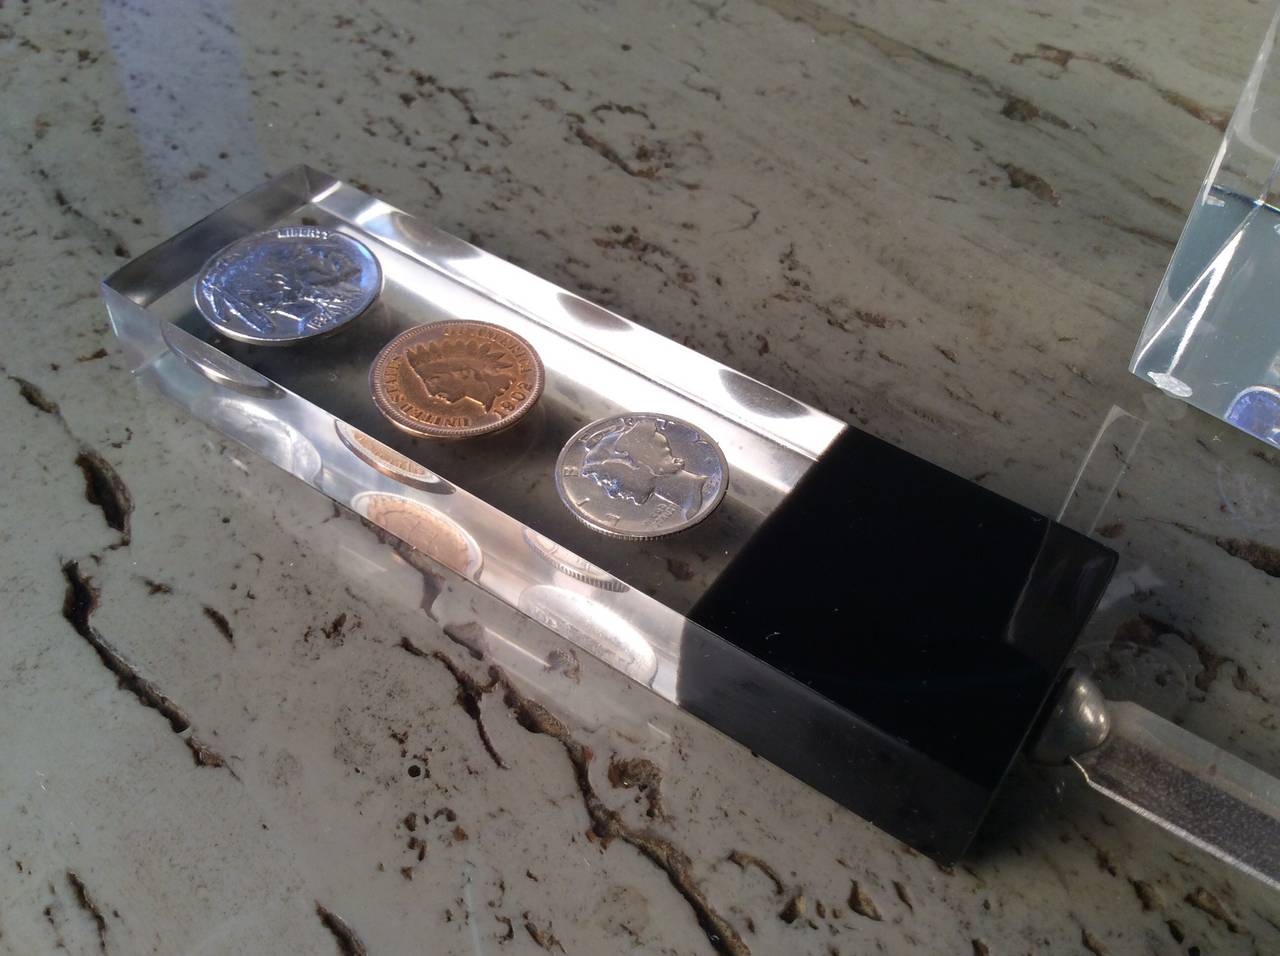 Nothing better than Lucite and money! Lucite letter opener and paperweight set with suspended US and Canadian Coin, 1970s. Beautiful desk accessories in excellent condition. 

In the style of Charles Hollis Jones, etc.